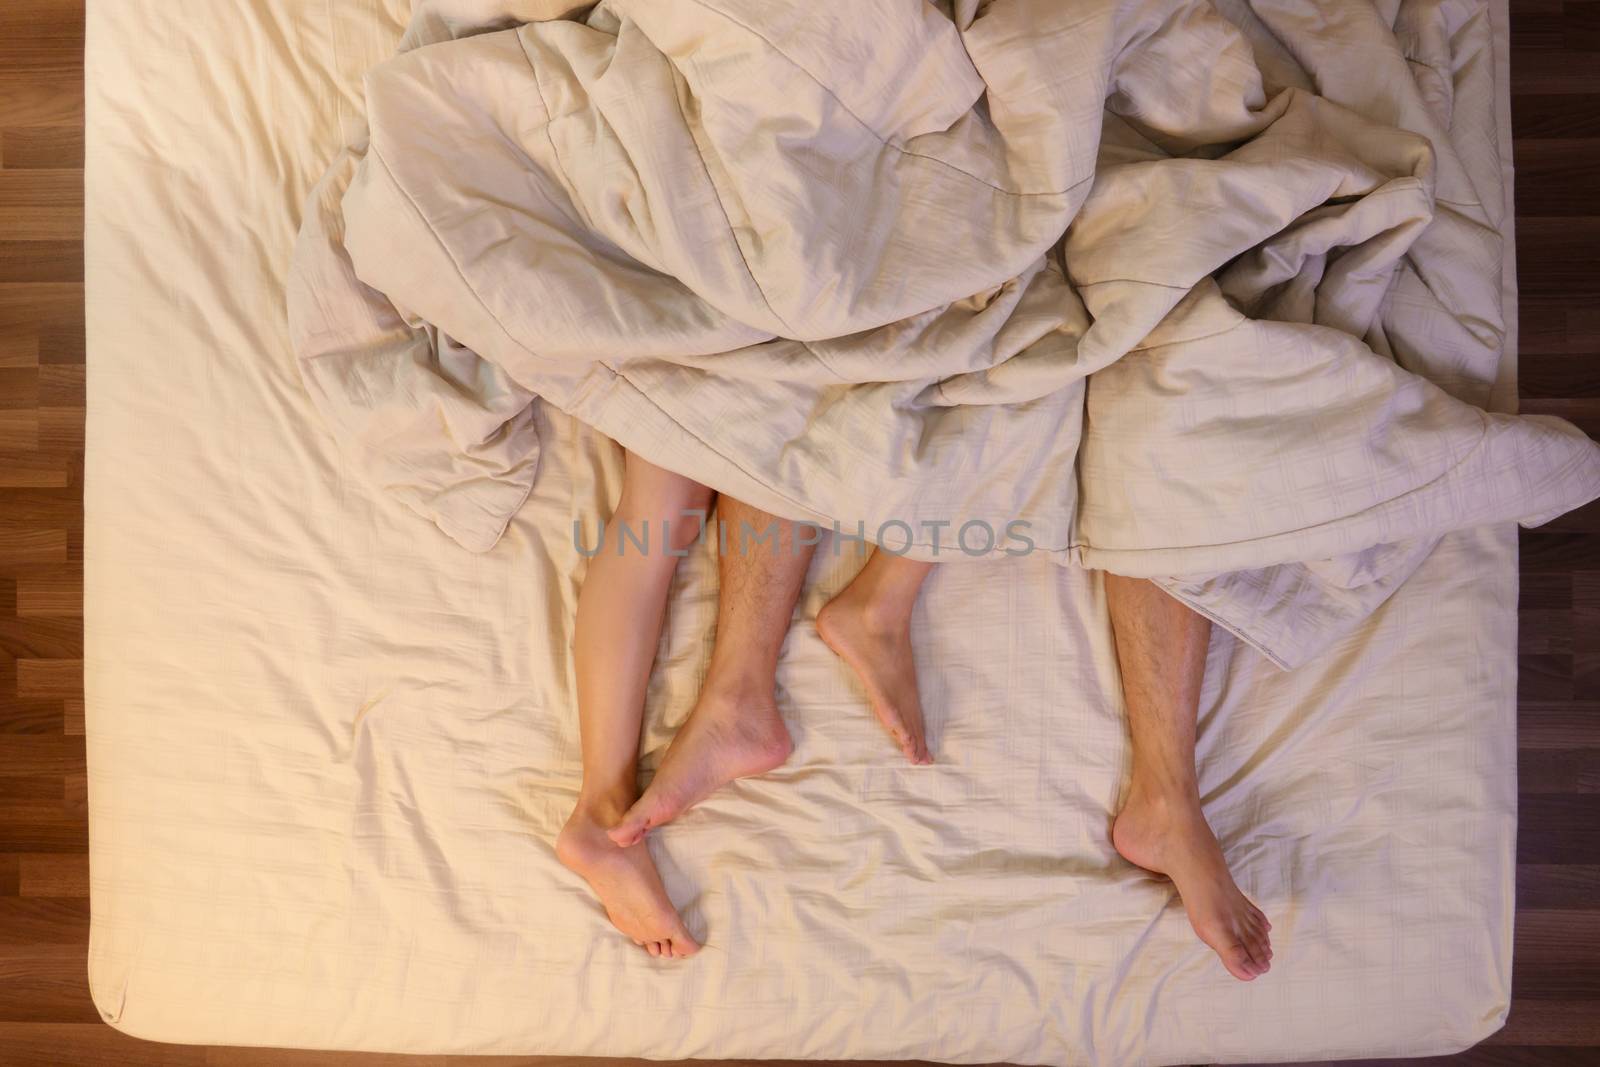 Close up of male and female feet on a bed having sex under sheets in the bedroom.